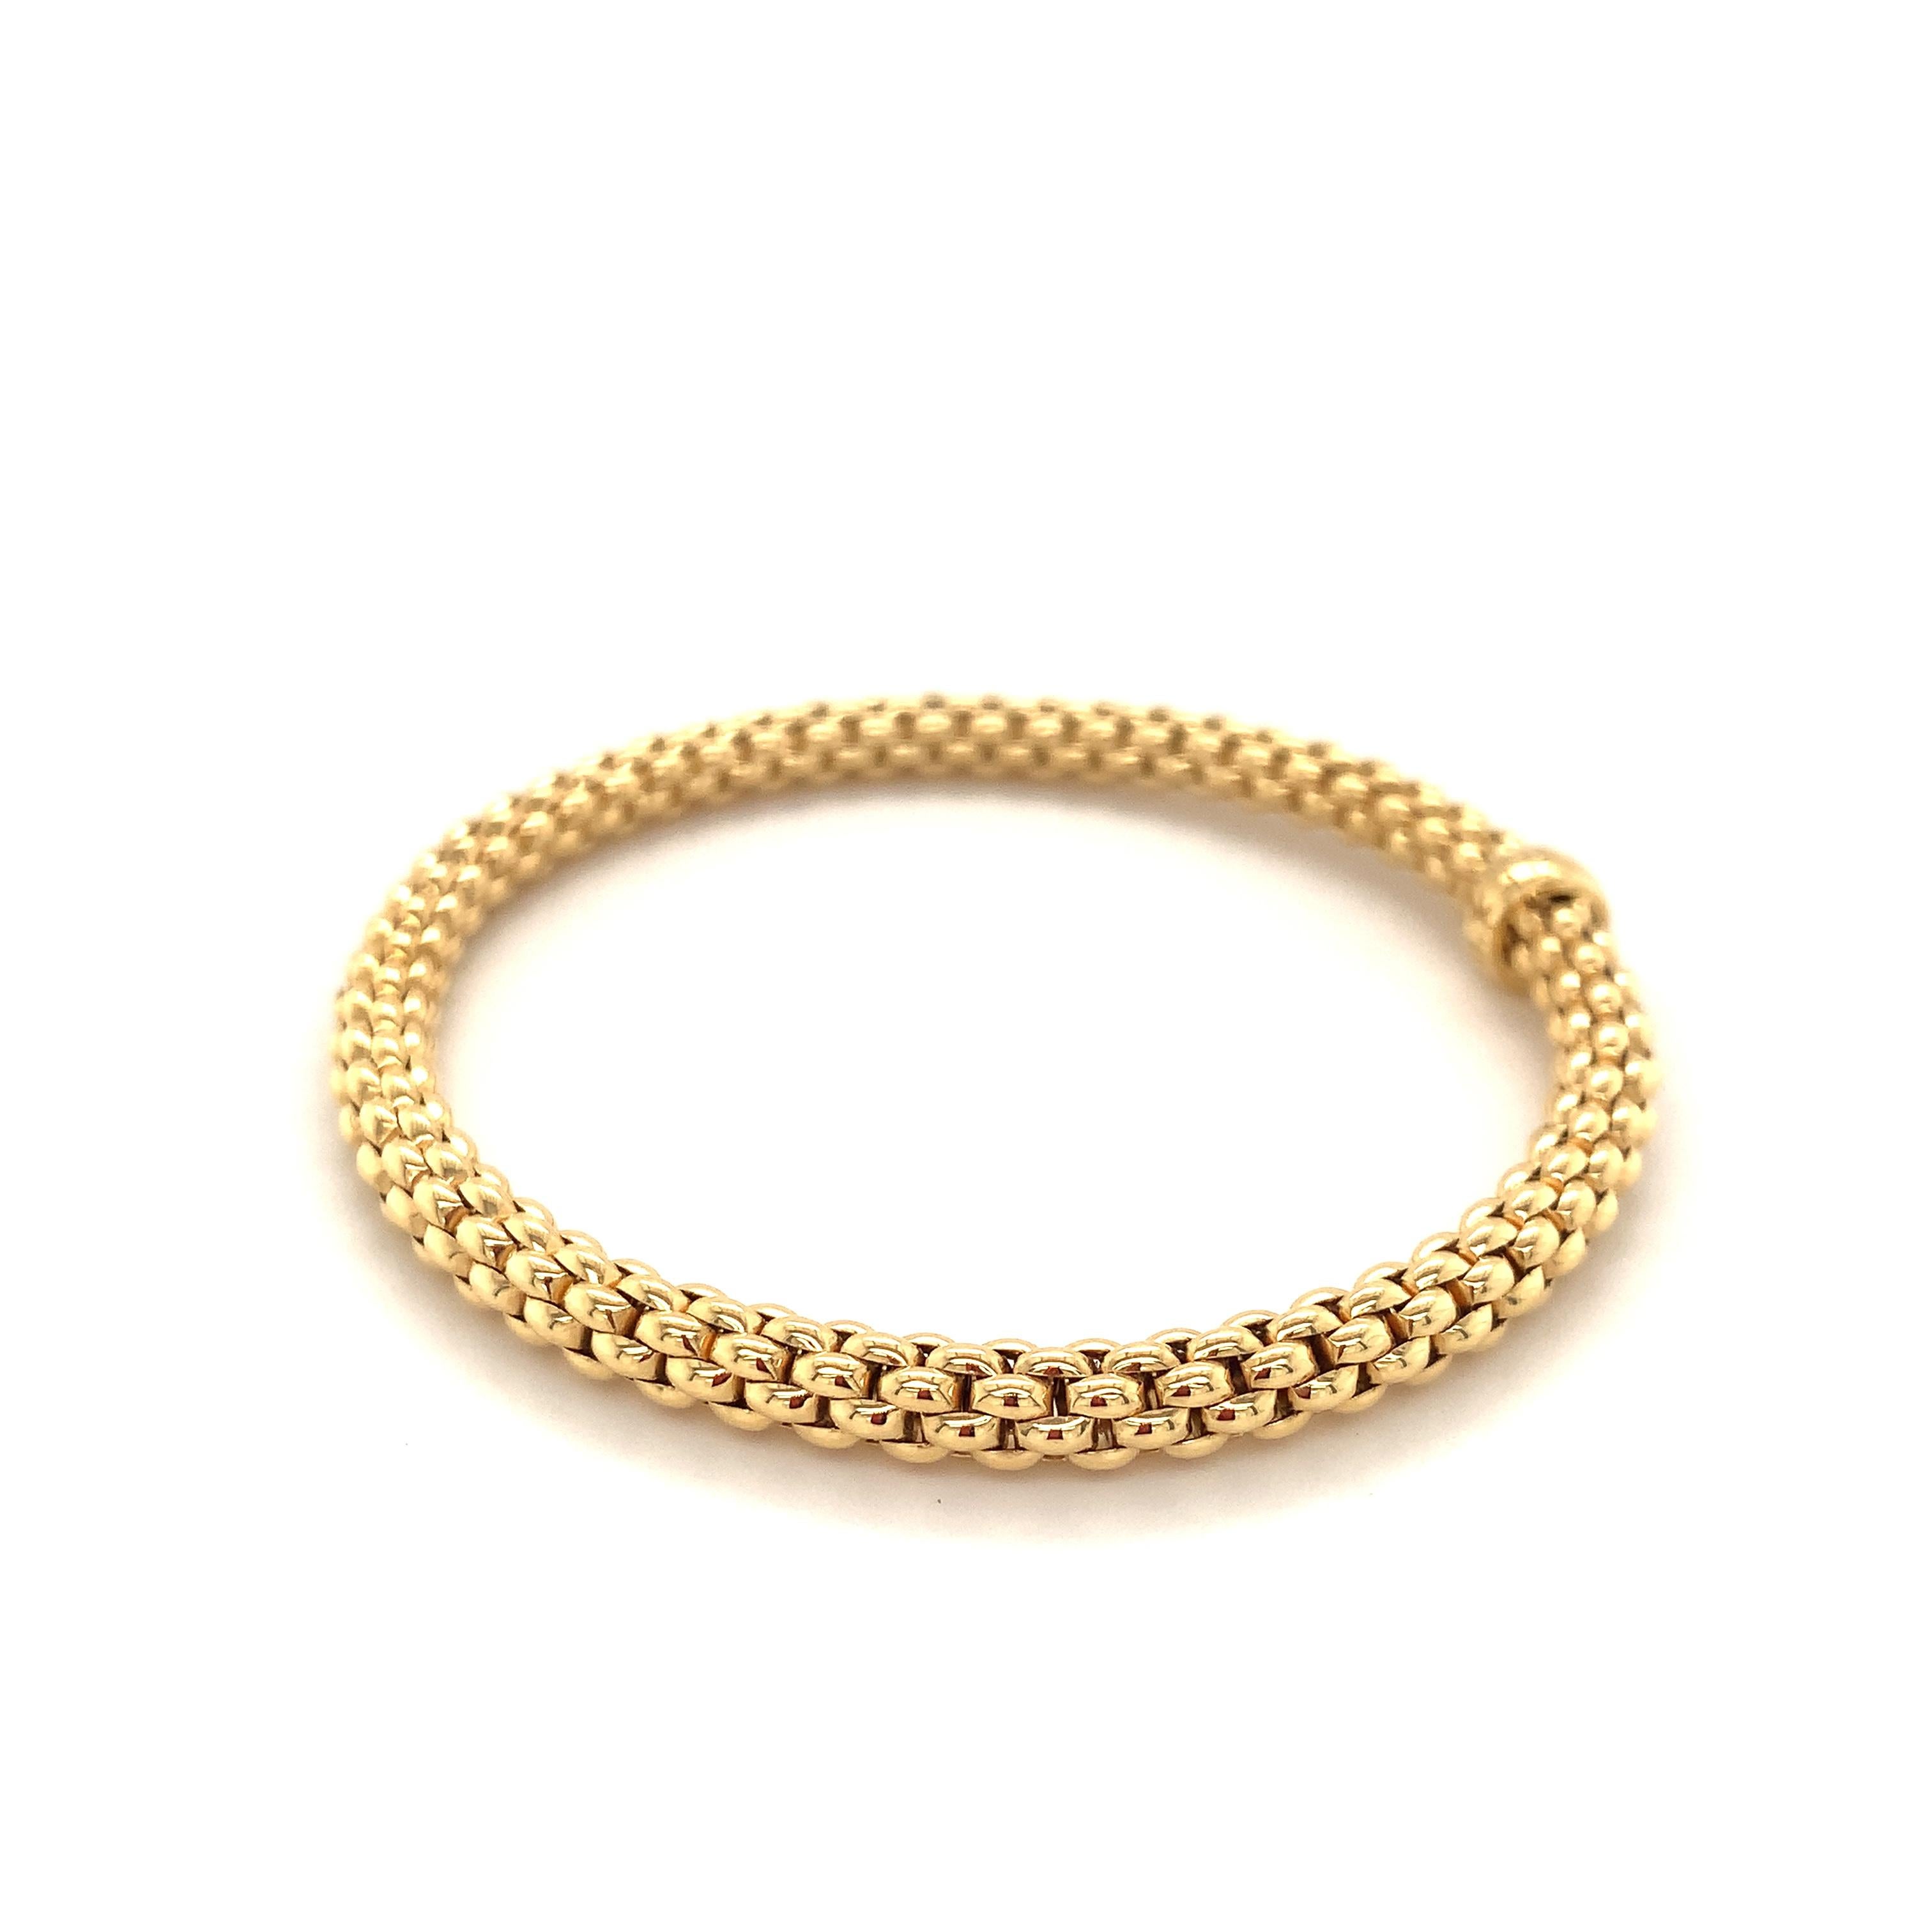 Fope Bracelet 18K Yellow Gold with Solid Gold Rondel 620BM-G 11